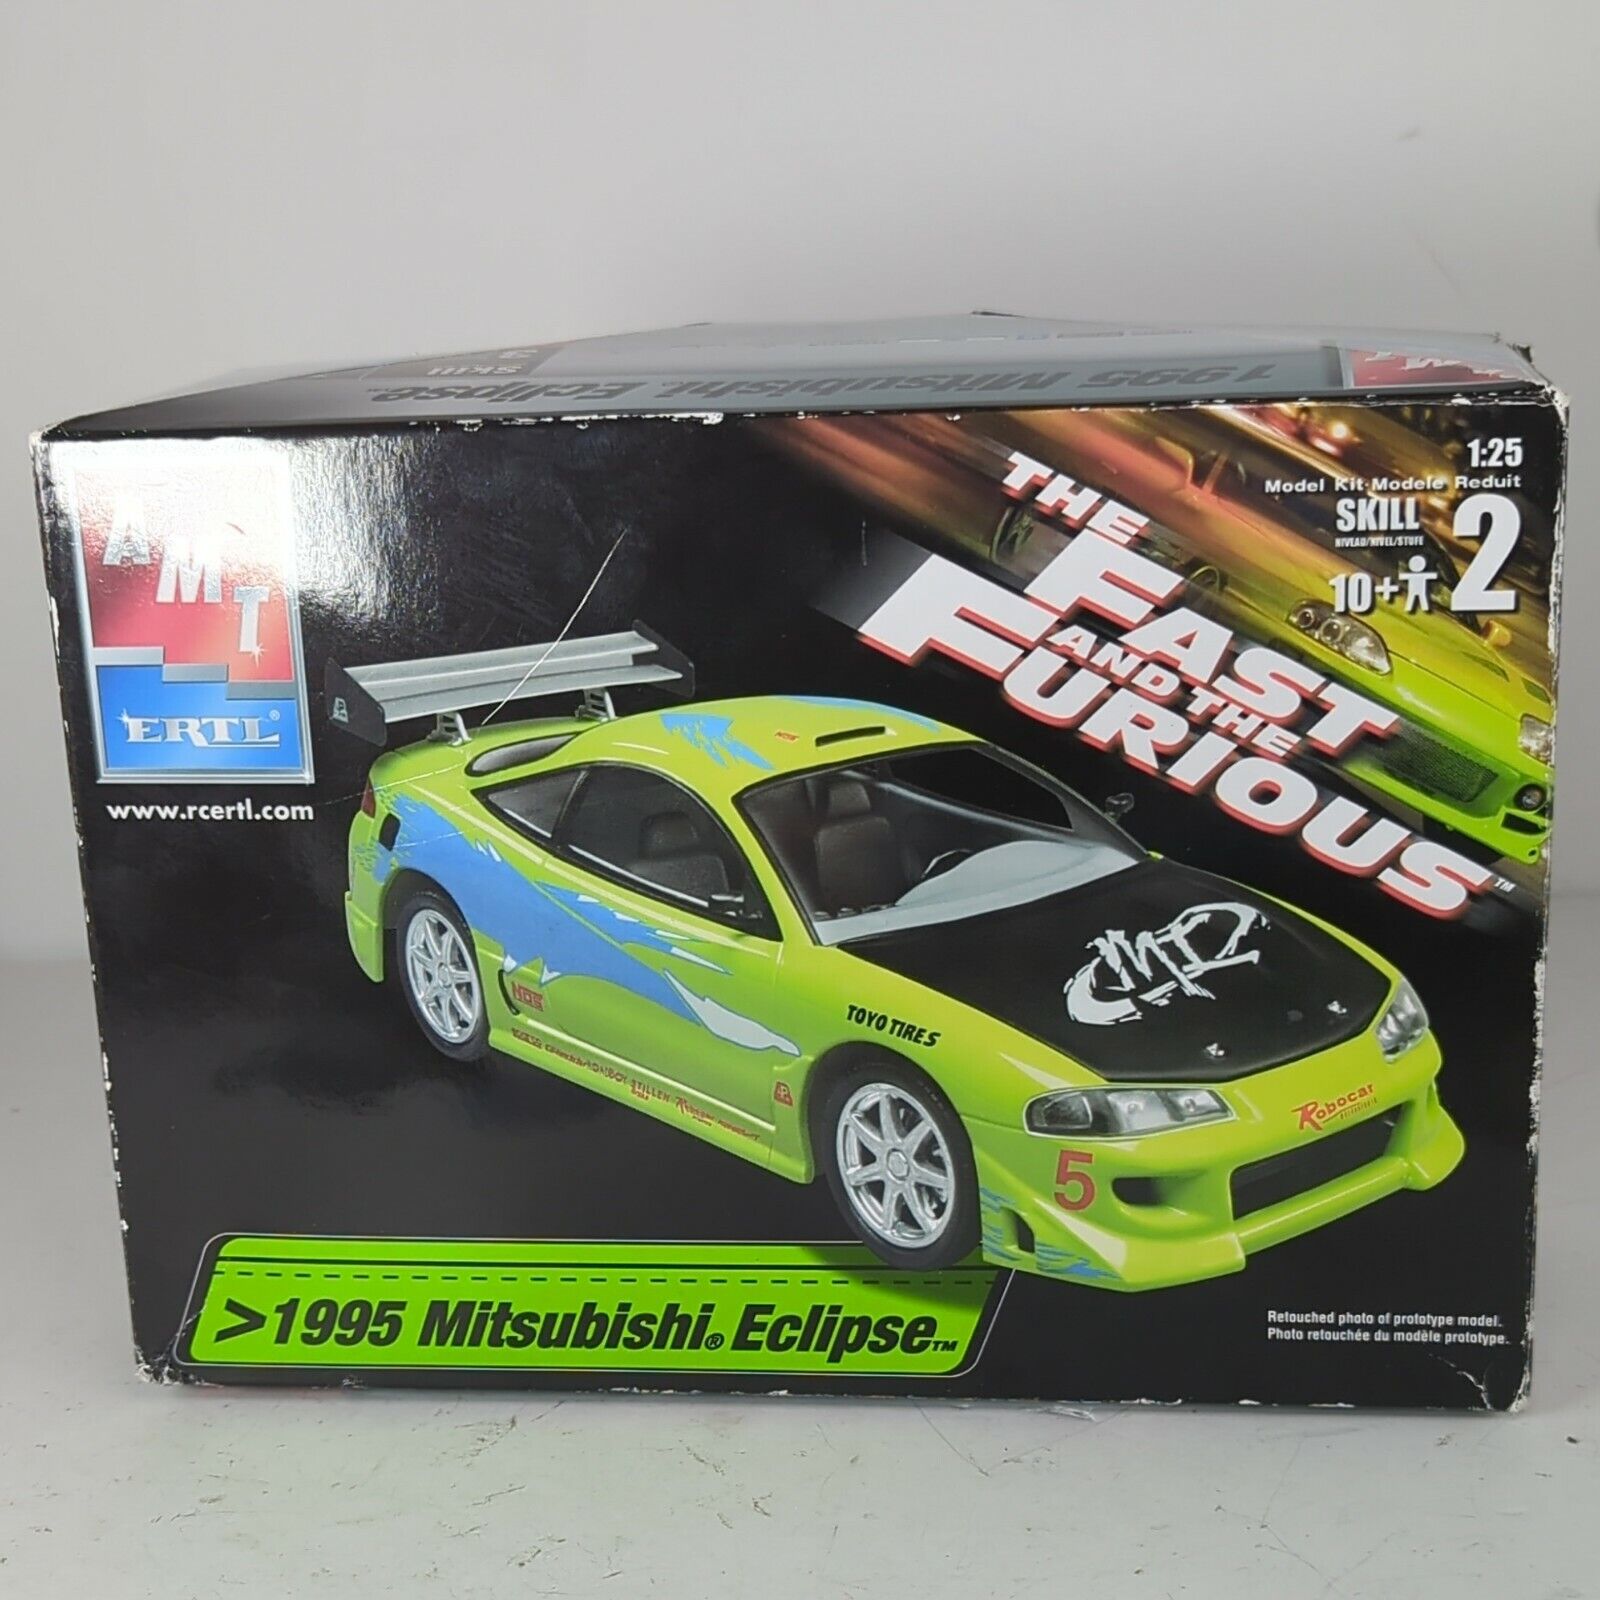 The Fast & The Furious 1995 Mitsubishi Eclipse Model New Open Box sealed bags